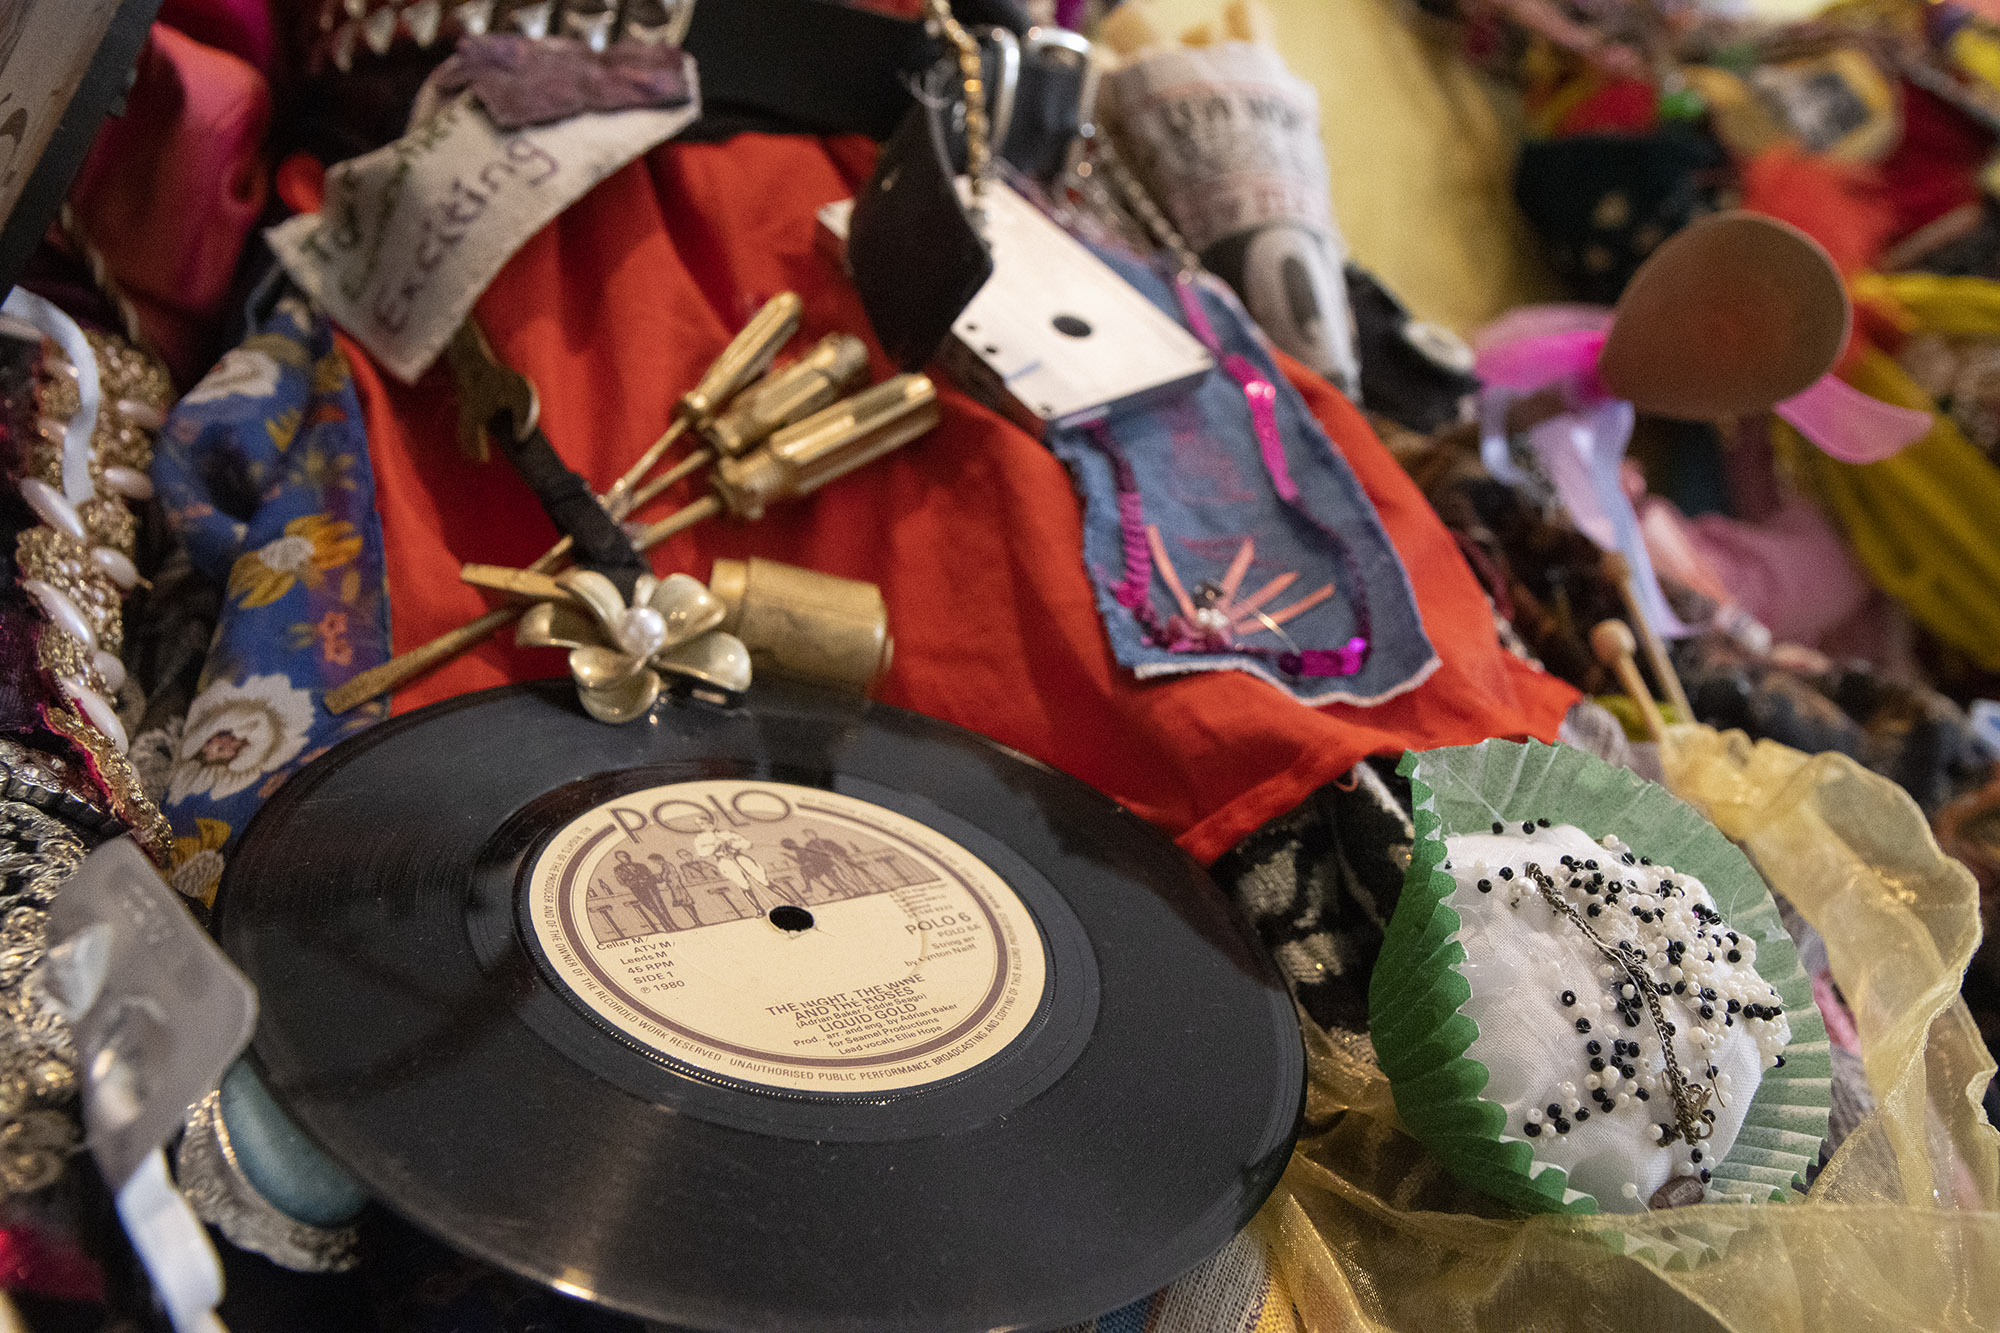 A section of a sculpture featuring a vinyl record, a cassette, gold-painted screwdrivers, a white fabric cup cake in a cupcake case, decorated with black and white seed beads and bits of jewellery and fabric. 